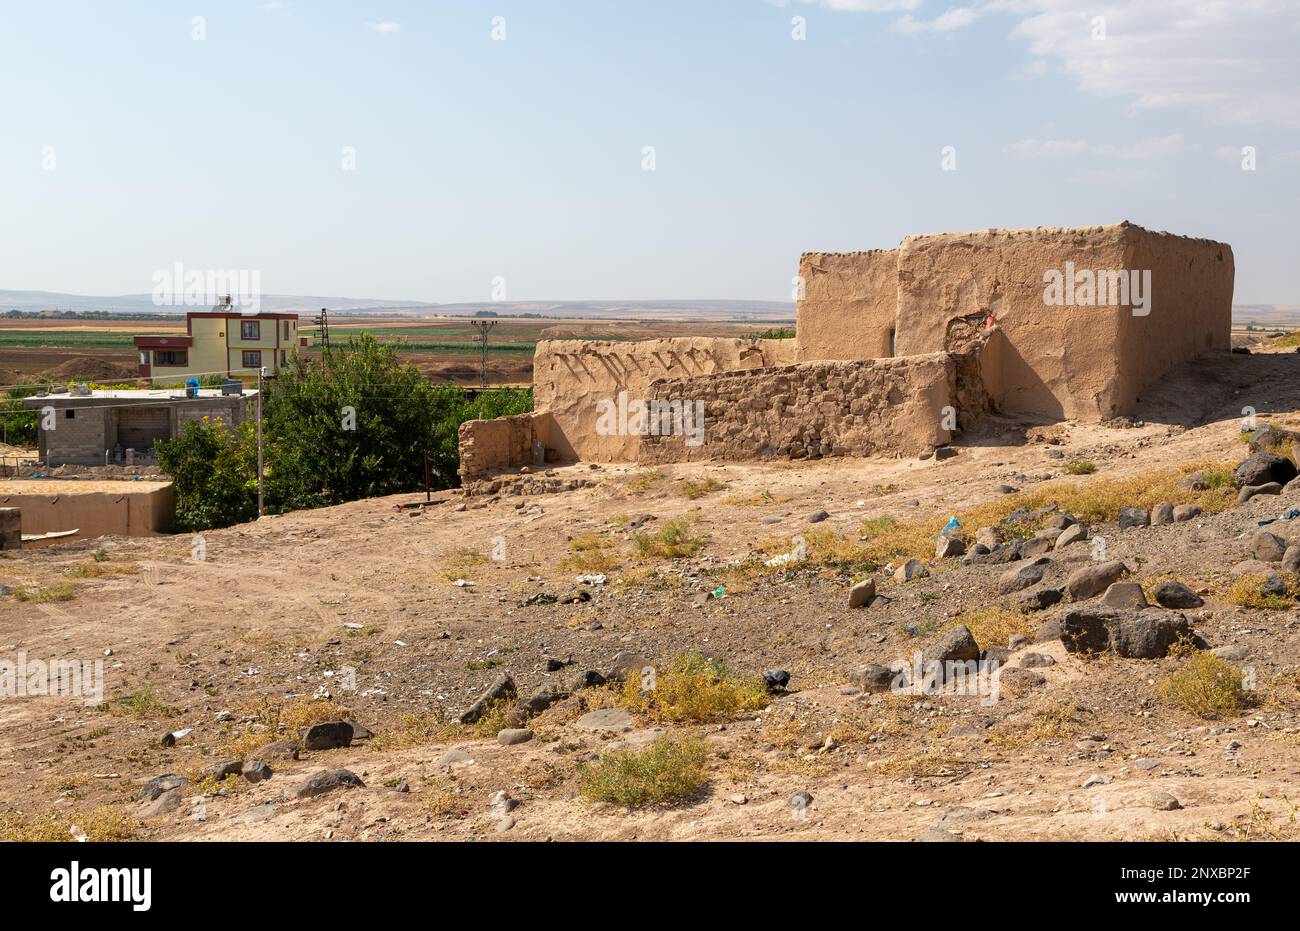 Old adobe house and modern buildings nearby. A house made of adobe, which was used frequently in Anatolia in the recent past. Kilis, Turkey. Stock Photo